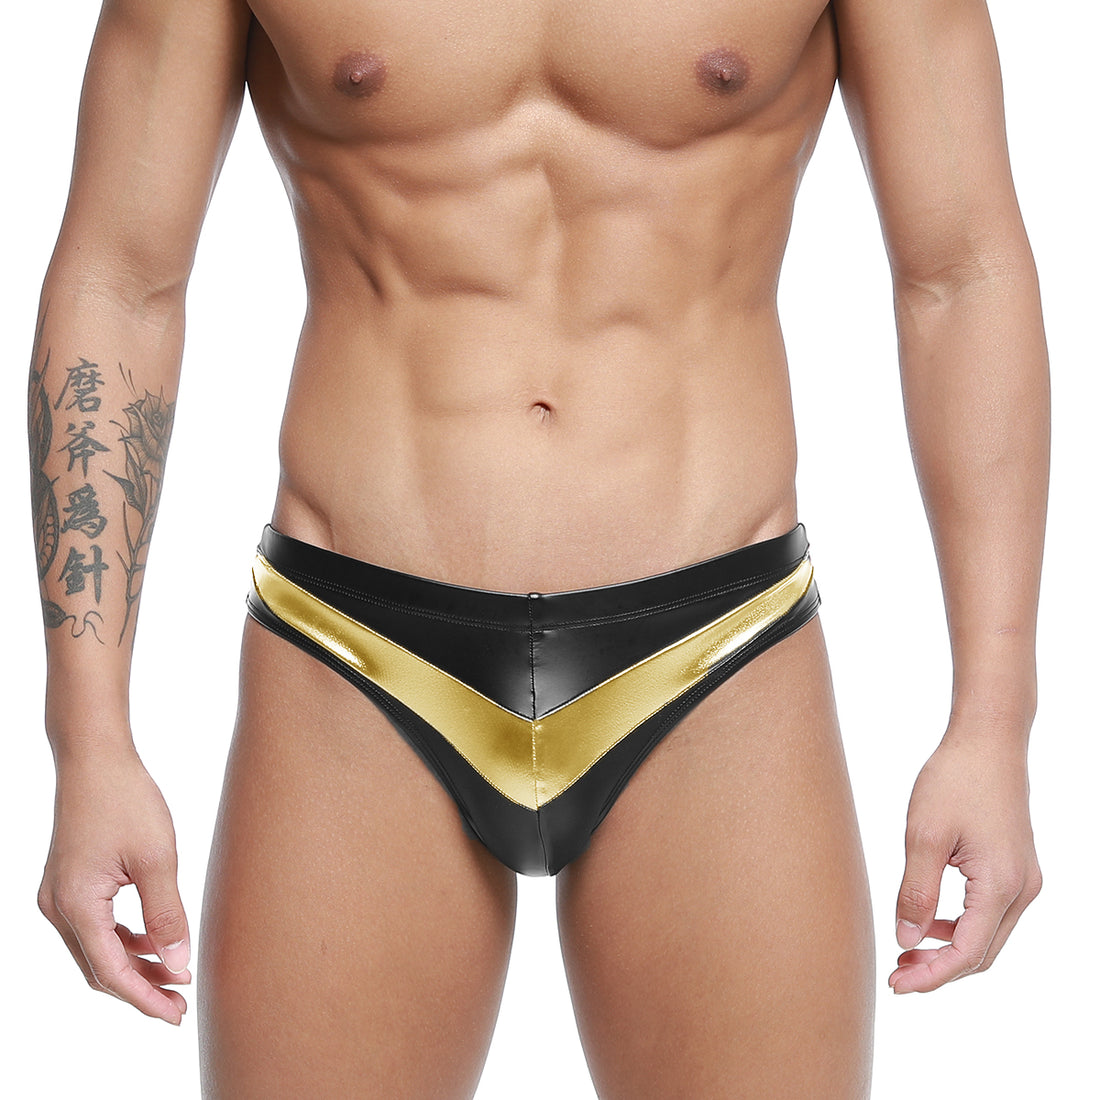 [MetroMuscleWear] Mark Competition Suit Gold (4974-05)